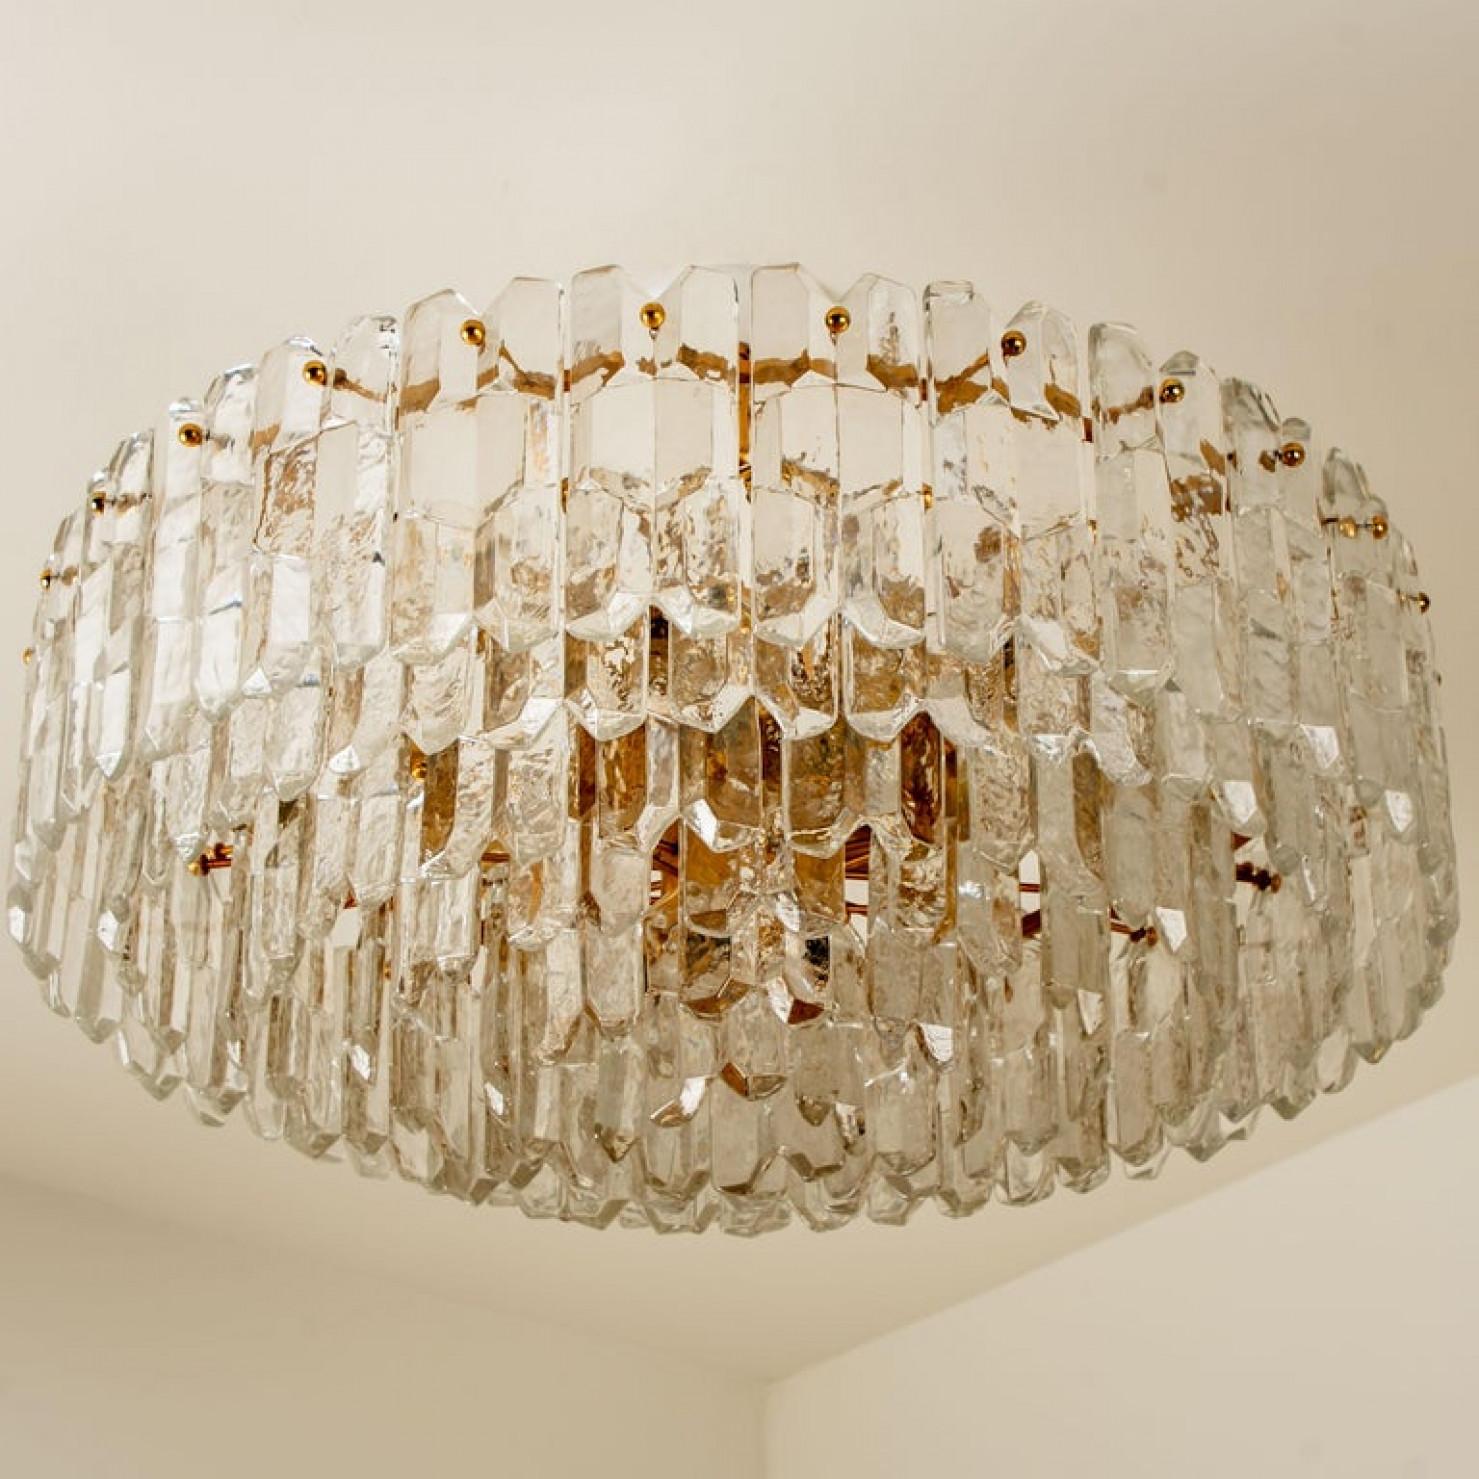 1 of the 2 exquisite 24-carat gold-plated brass and clear brilliant glass 'Palazzo' light fixture by J.T. Kalmar, Vienna, Austria, manufactured in circa 1970 (late 1960s and early 1970s). H high end piece. Beautiful craftsmanship from the 20th